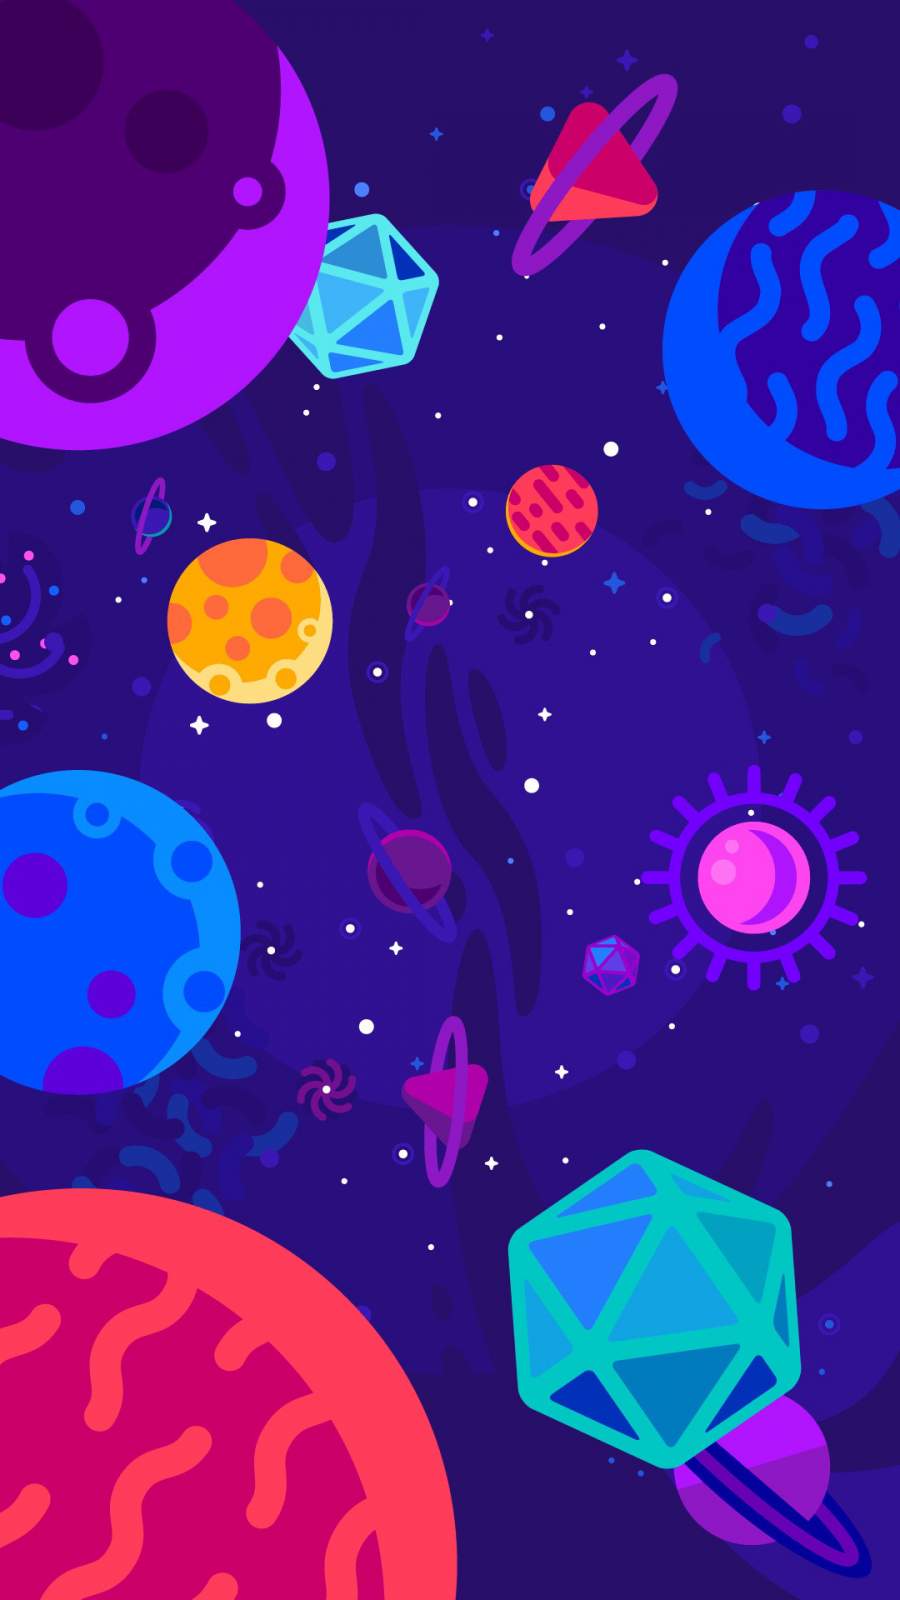 Animated Space IPhone Wallpaper - IPhone Wallpapers : iPhone Wallpapers